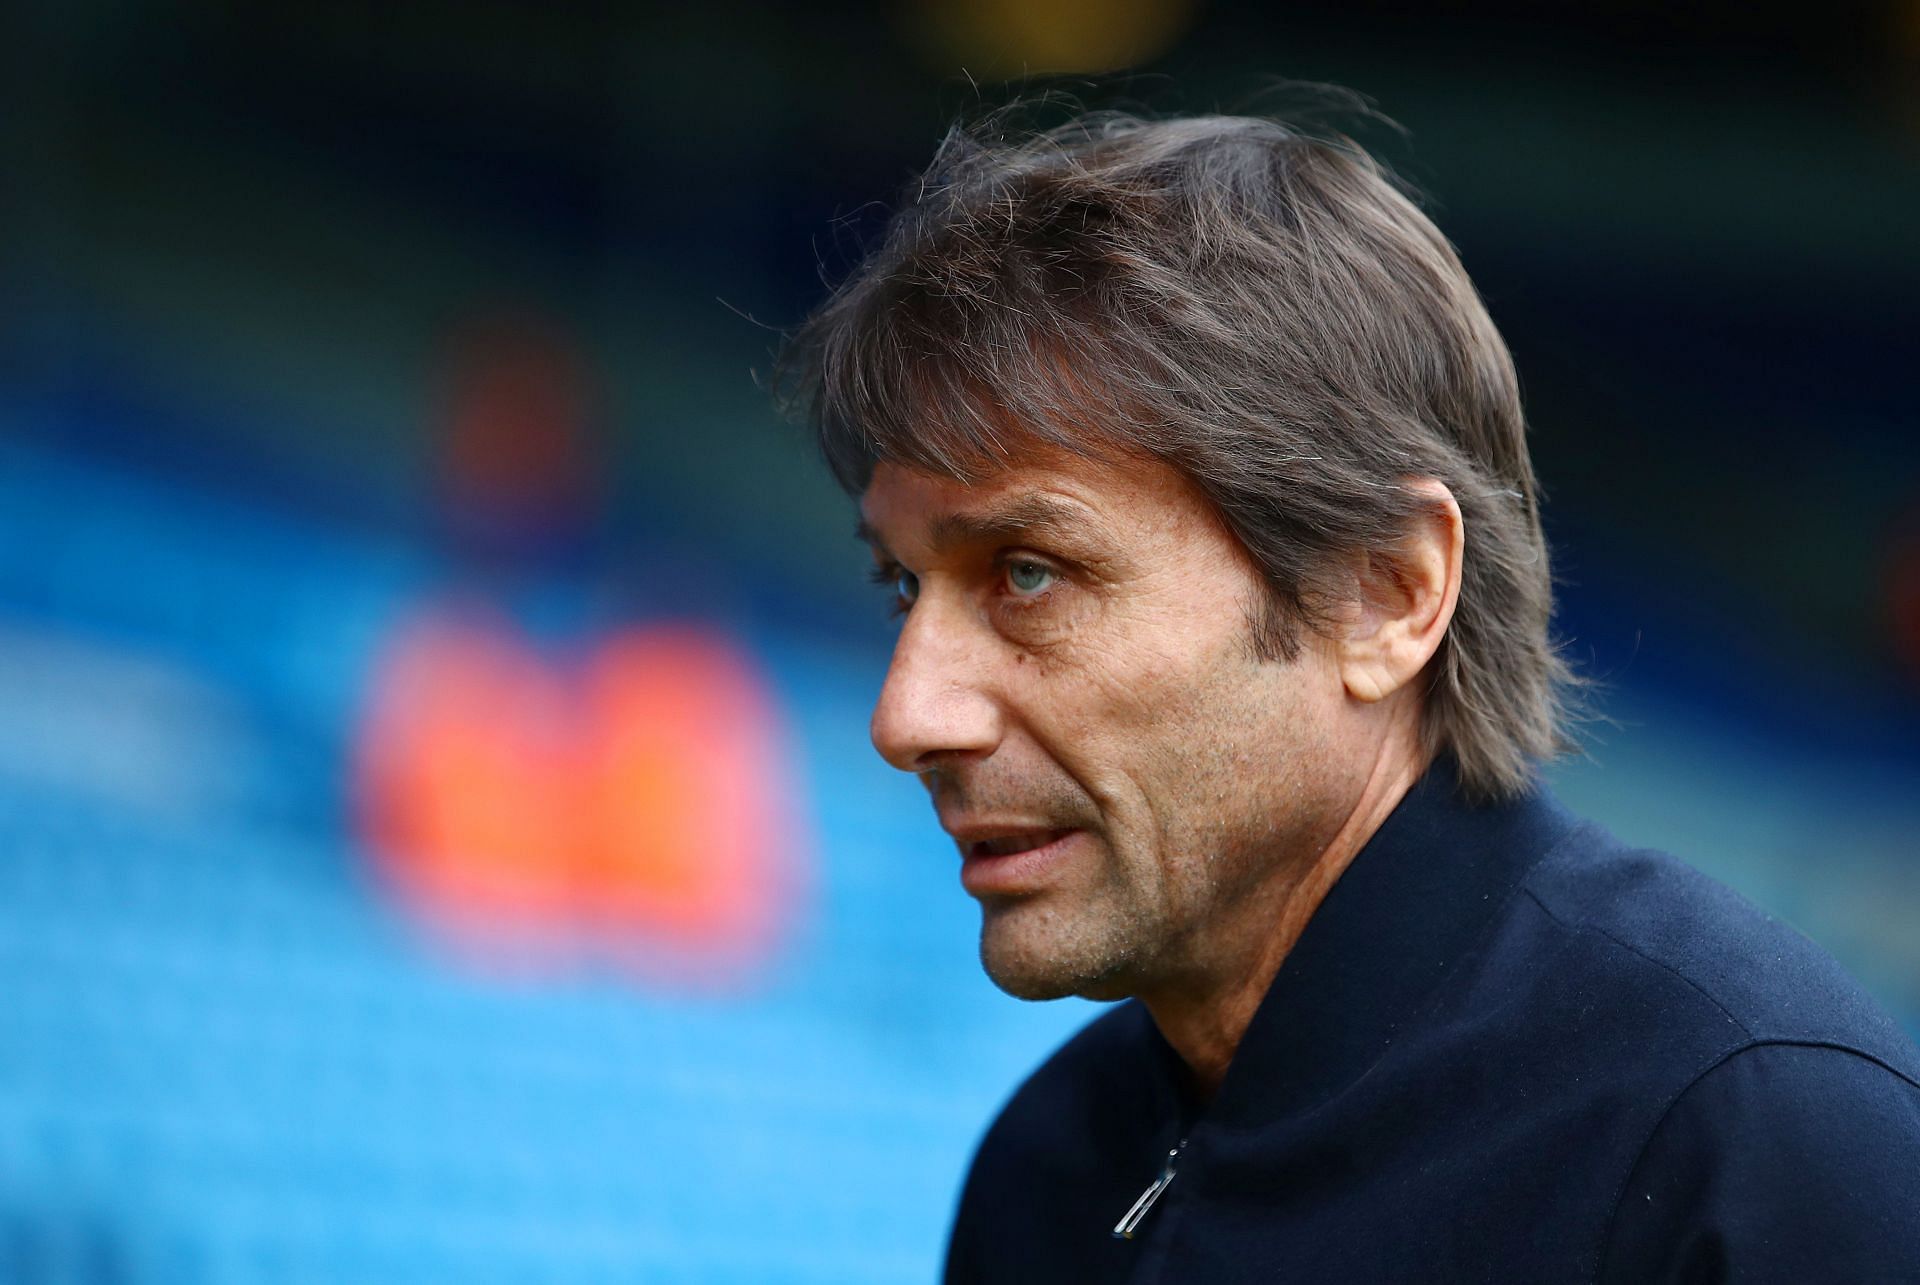 Antonio Conte could leave Tottenham Hotspur within a year of joining.